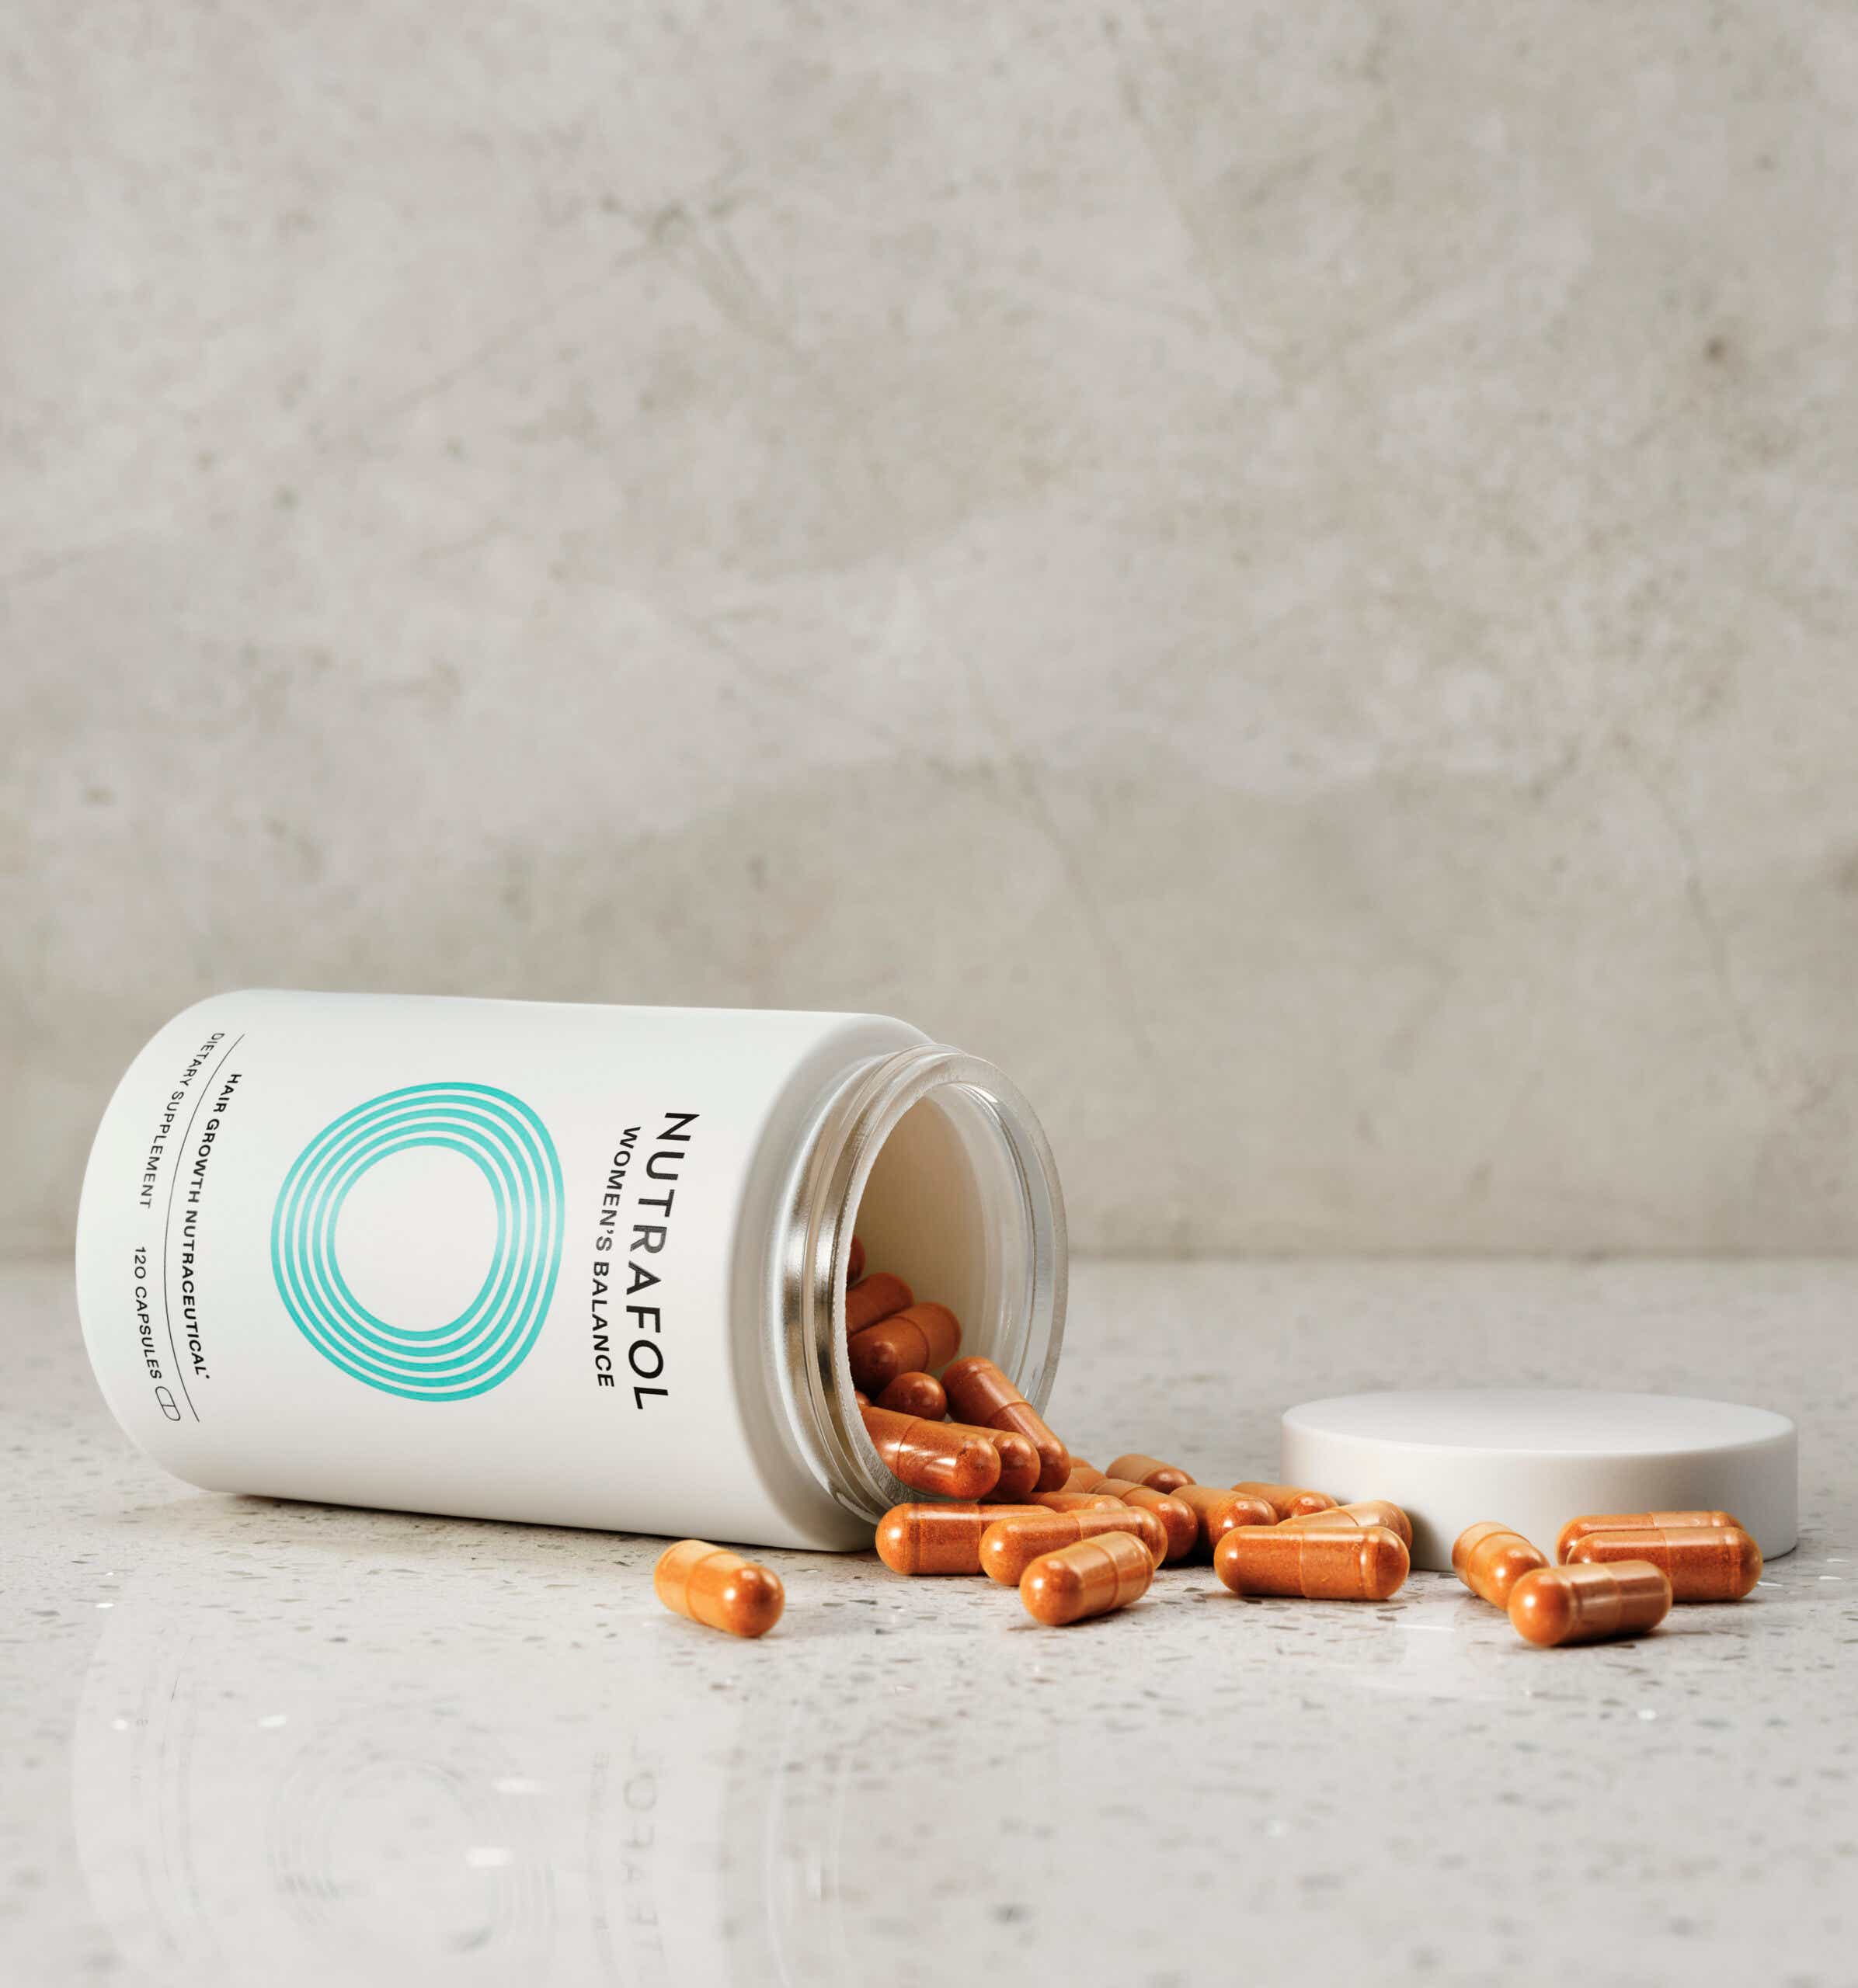 Nutrafol Balance Capsules spilling out of jar